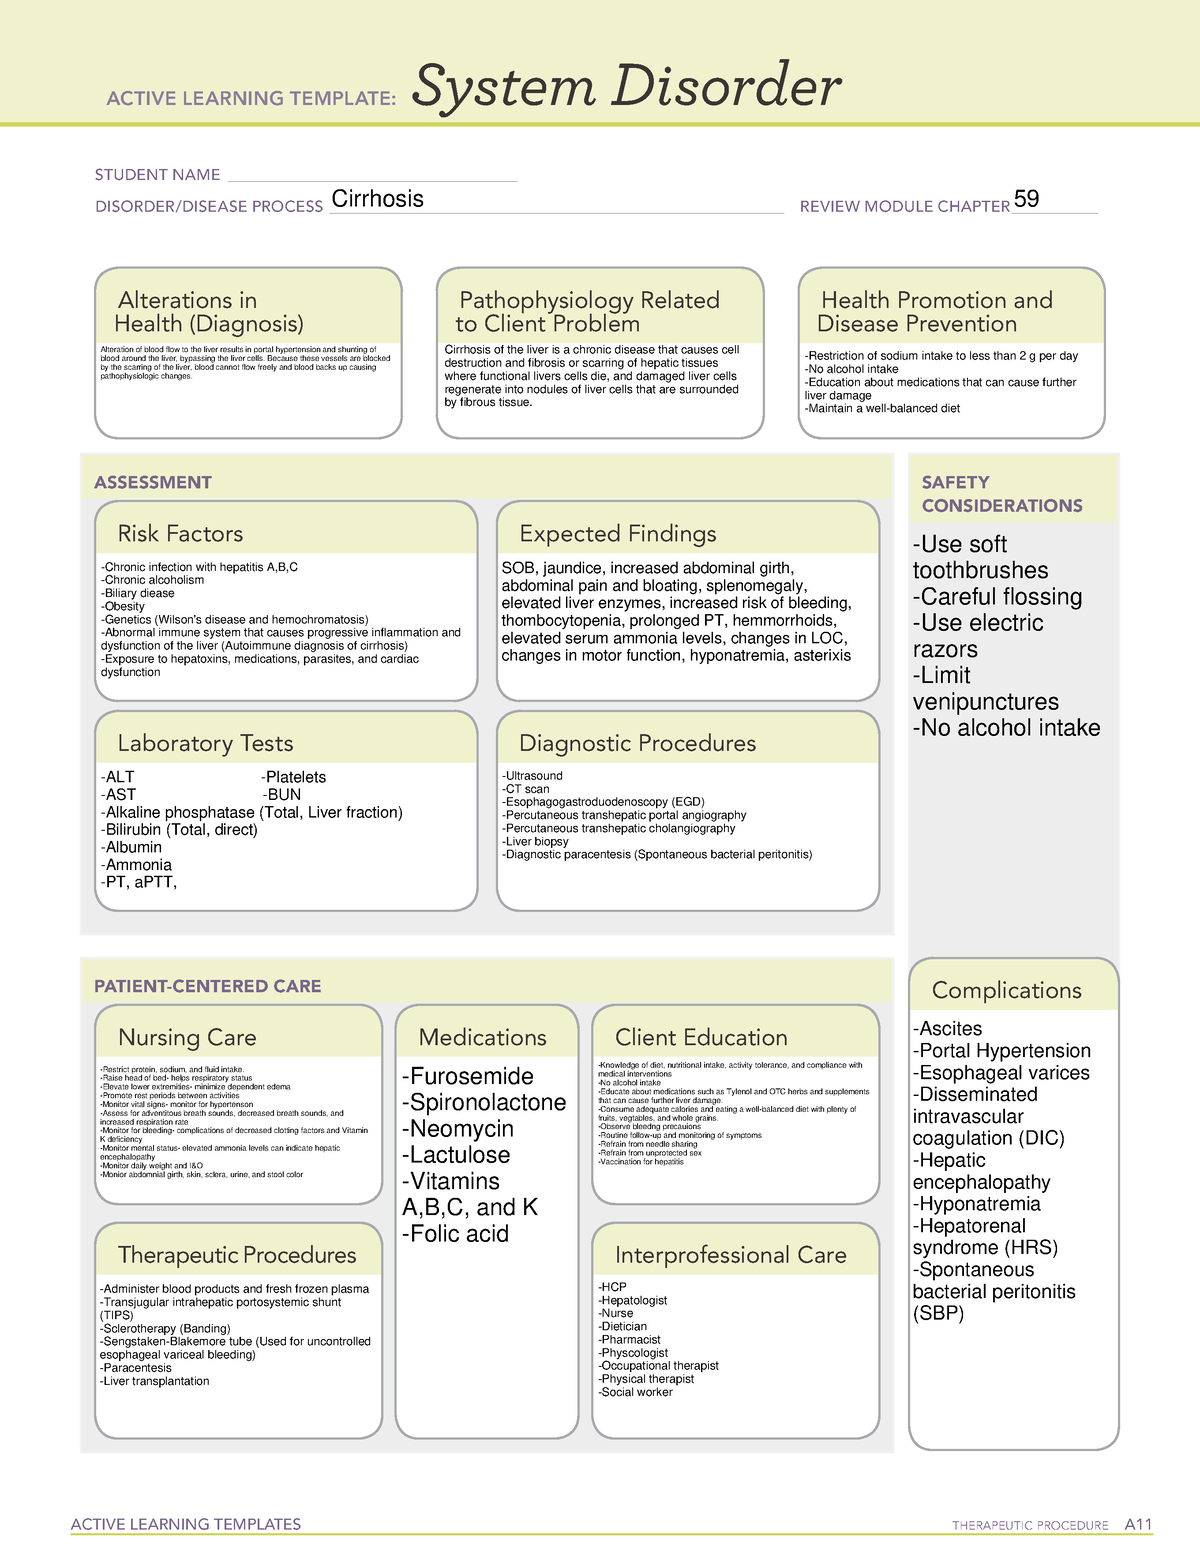 Cirrhosis - ati template - ACTIVE LEARNING TEMPLATES THERAPEUTIC ...